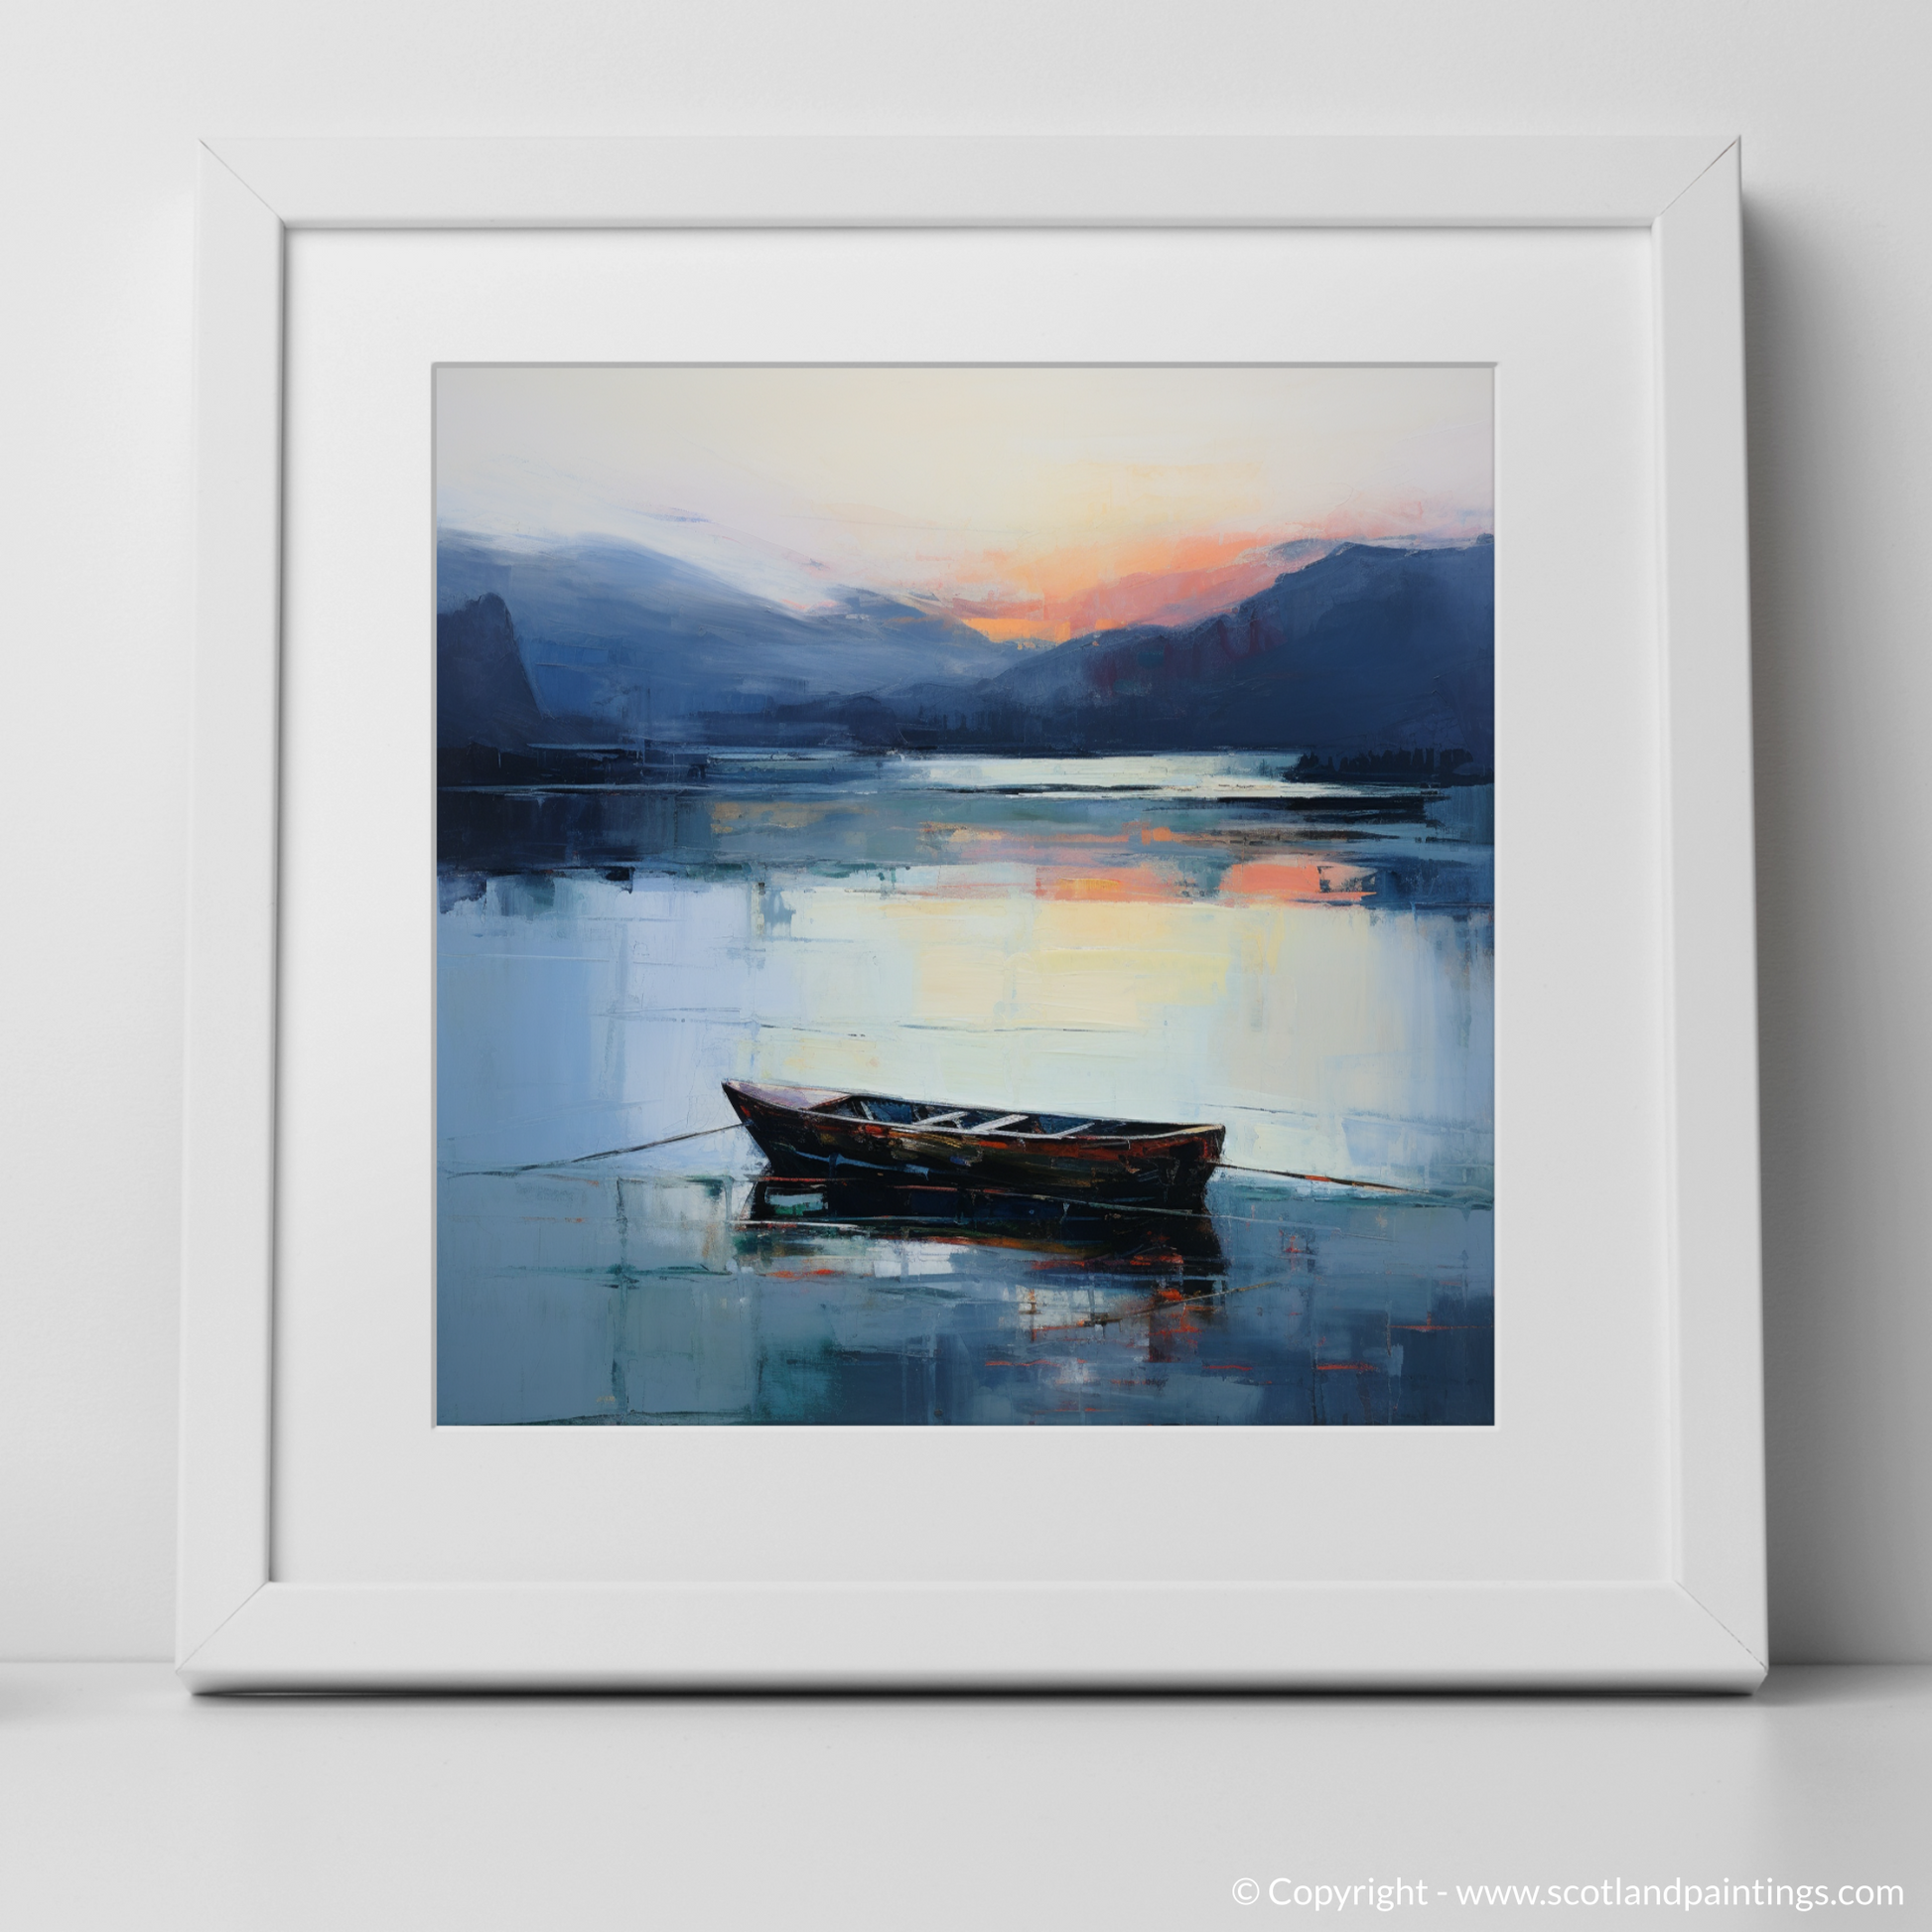 Art Print of Lone rowboat on Loch Lomond at dusk with a white frame